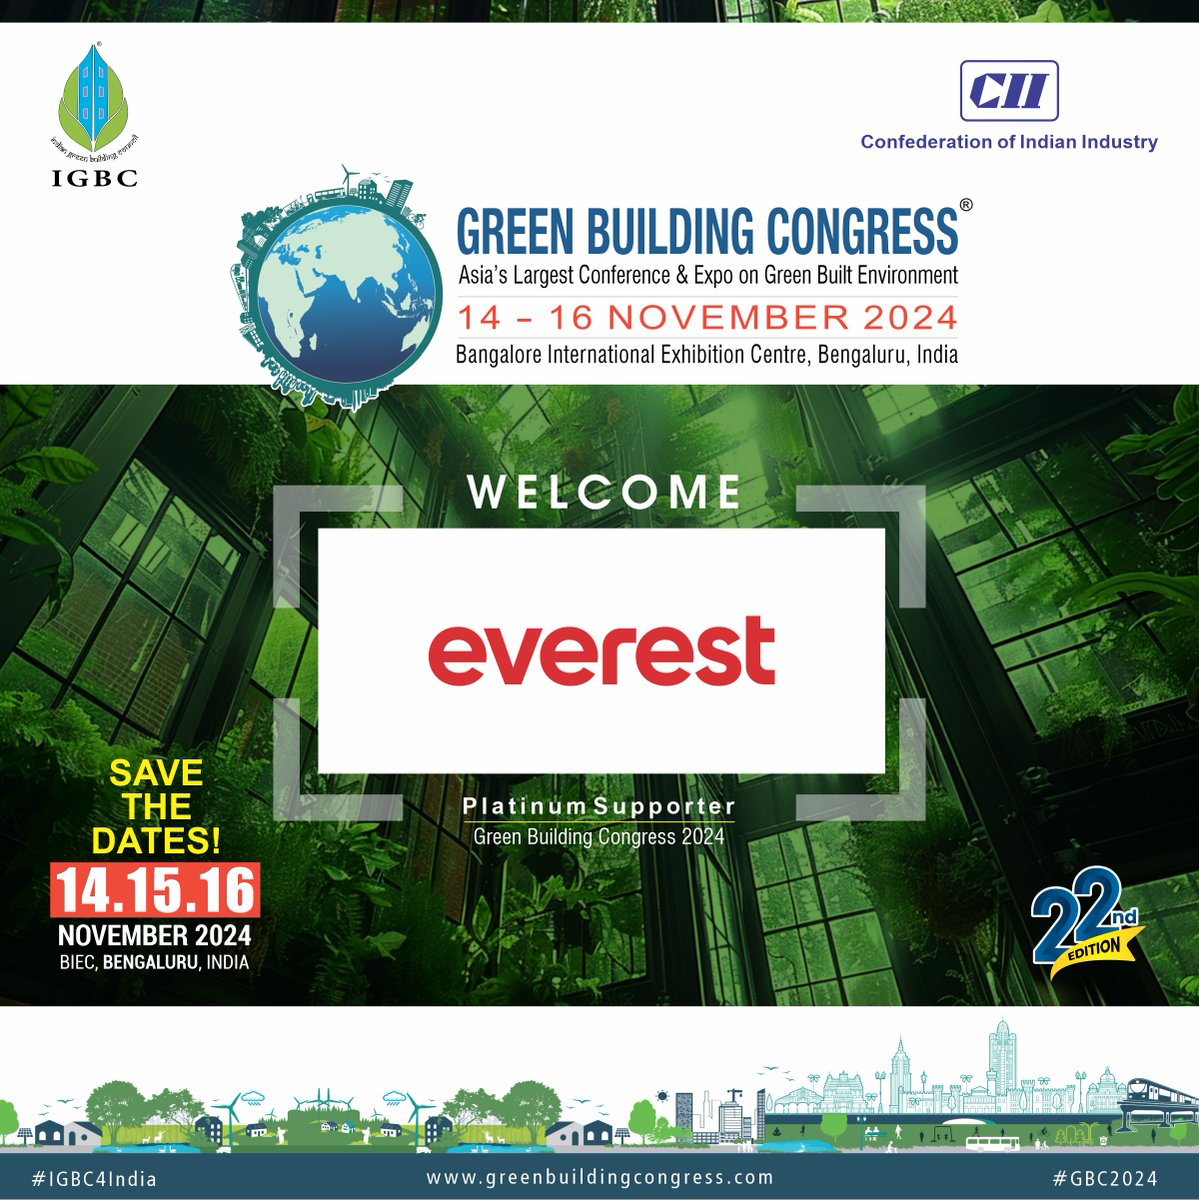 🌟We're glad to have Everest Industries Ltd on board as a Platinum Supporter for the 22nd edition of our prestigious event - IGBC GBC 2024! 🎉. Join us from 14th - 16th November 2024 at the BIEC, Bengaluru, India. See you there!🏙️ @FollowCII @WorldGBC #igbc #cii #everest